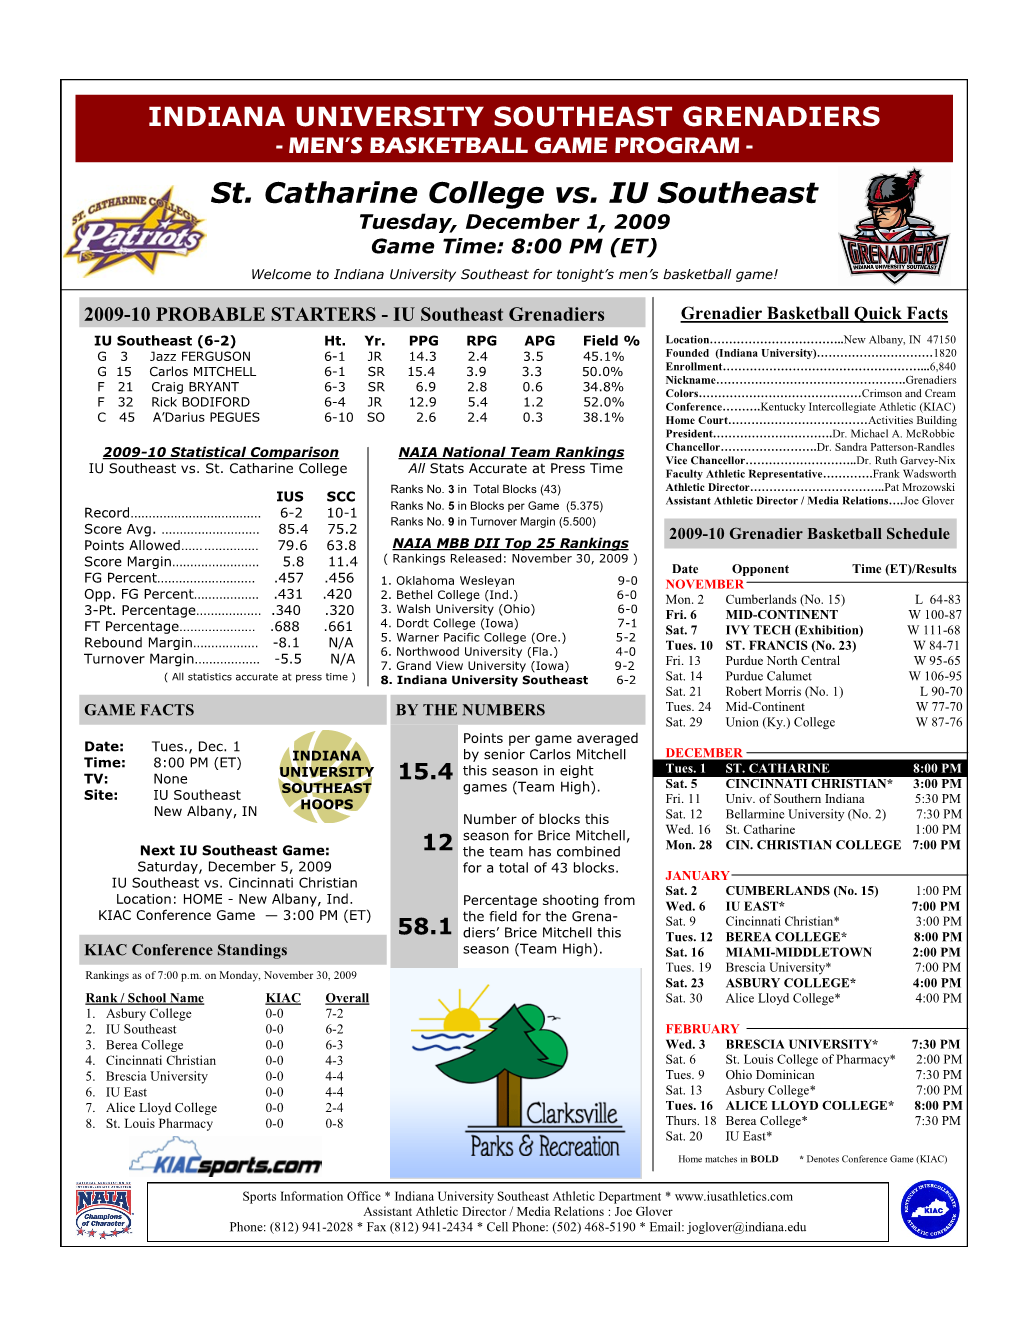 St. Catharine College Vs. IU Southeast Tuesday, December 1, 2009 Game Time: 8:00 PM (ET)